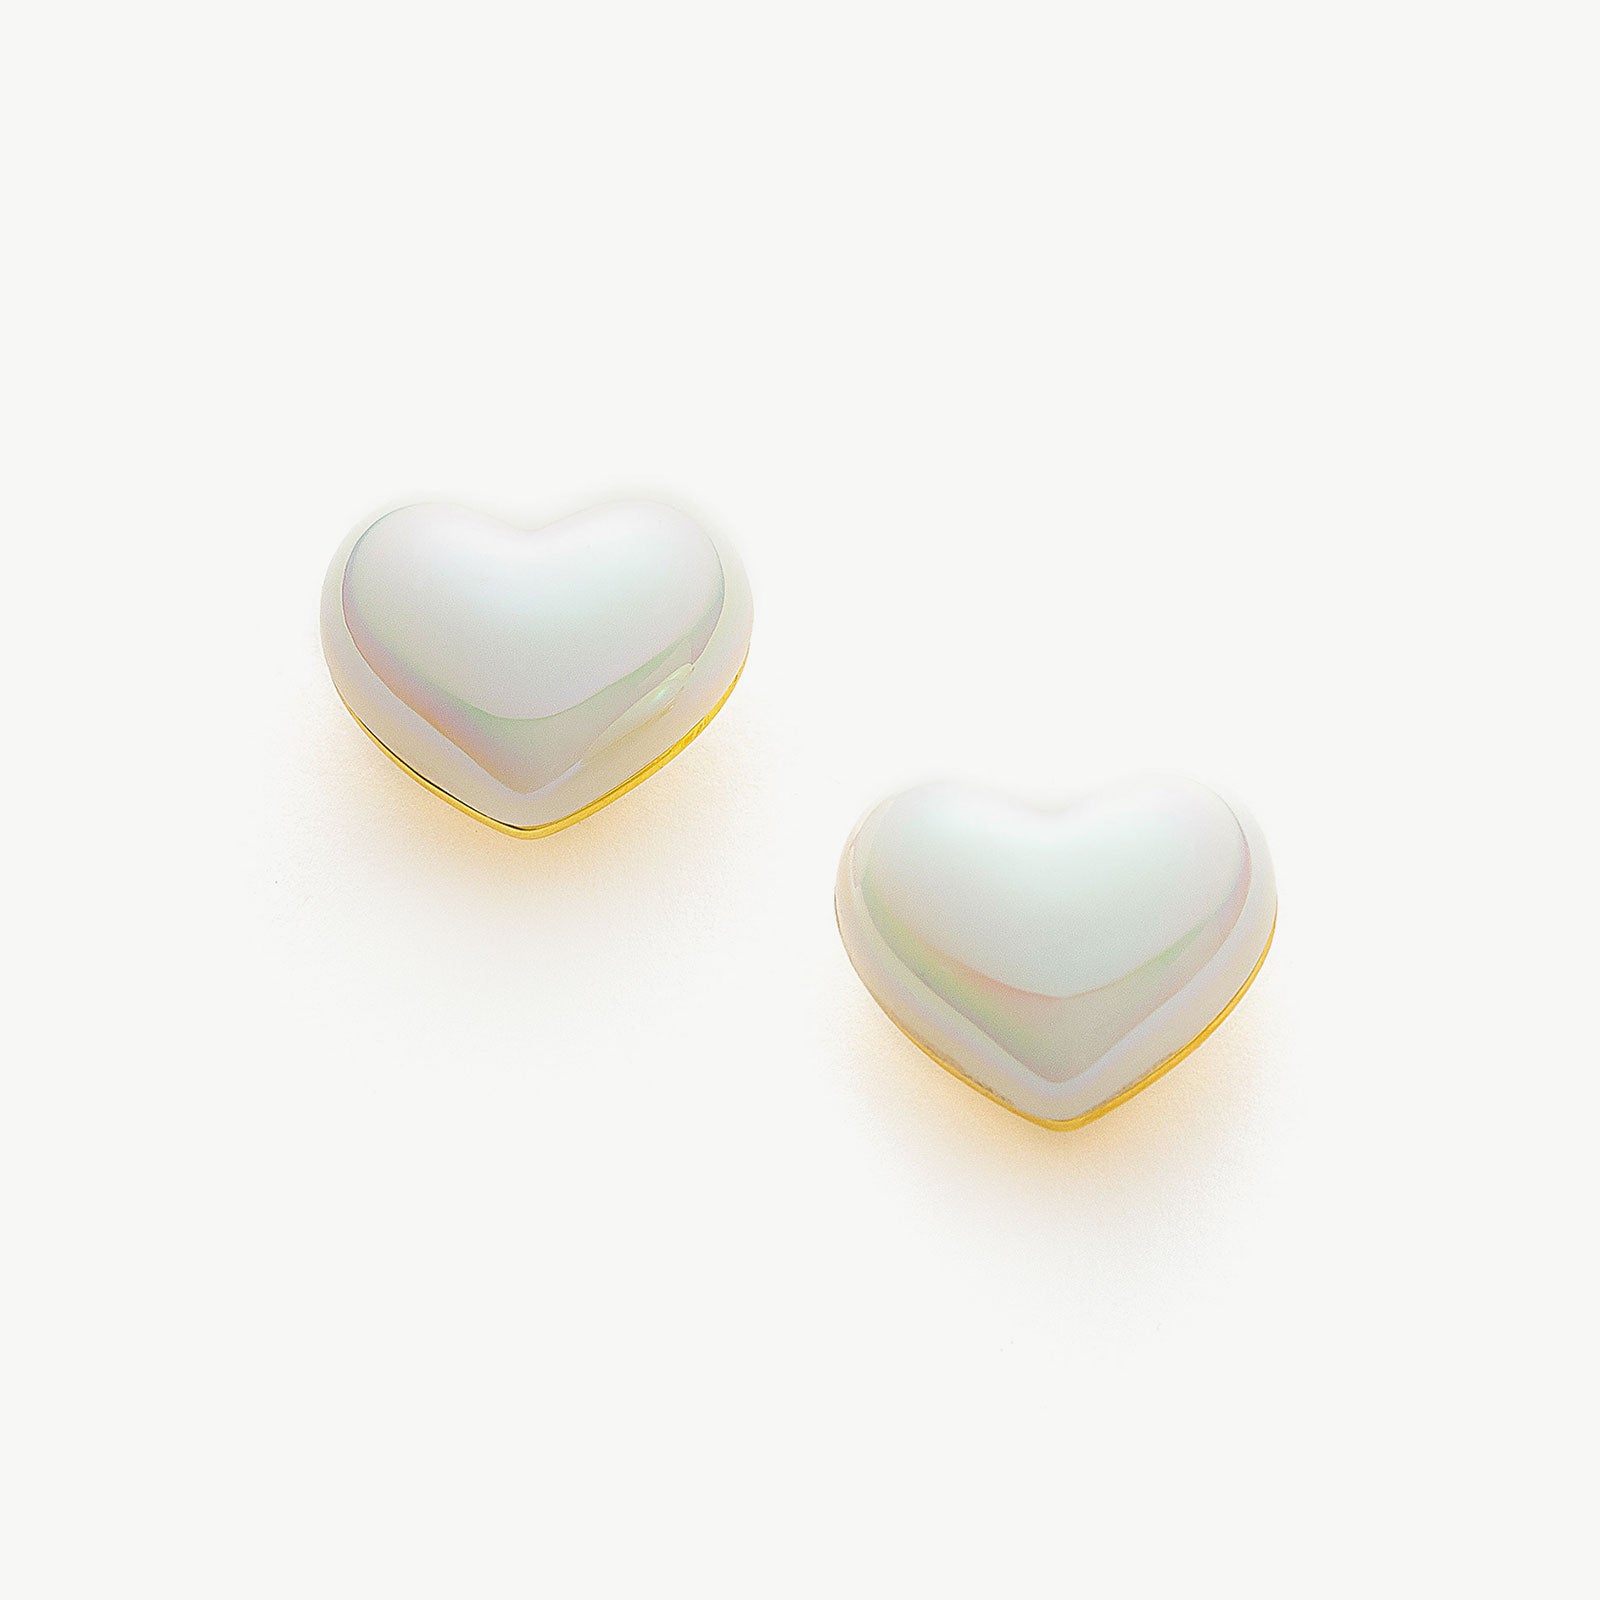 Heart-shaped Stud Earrings in a small size, perfect for adding a touch of romance without overwhelming your look